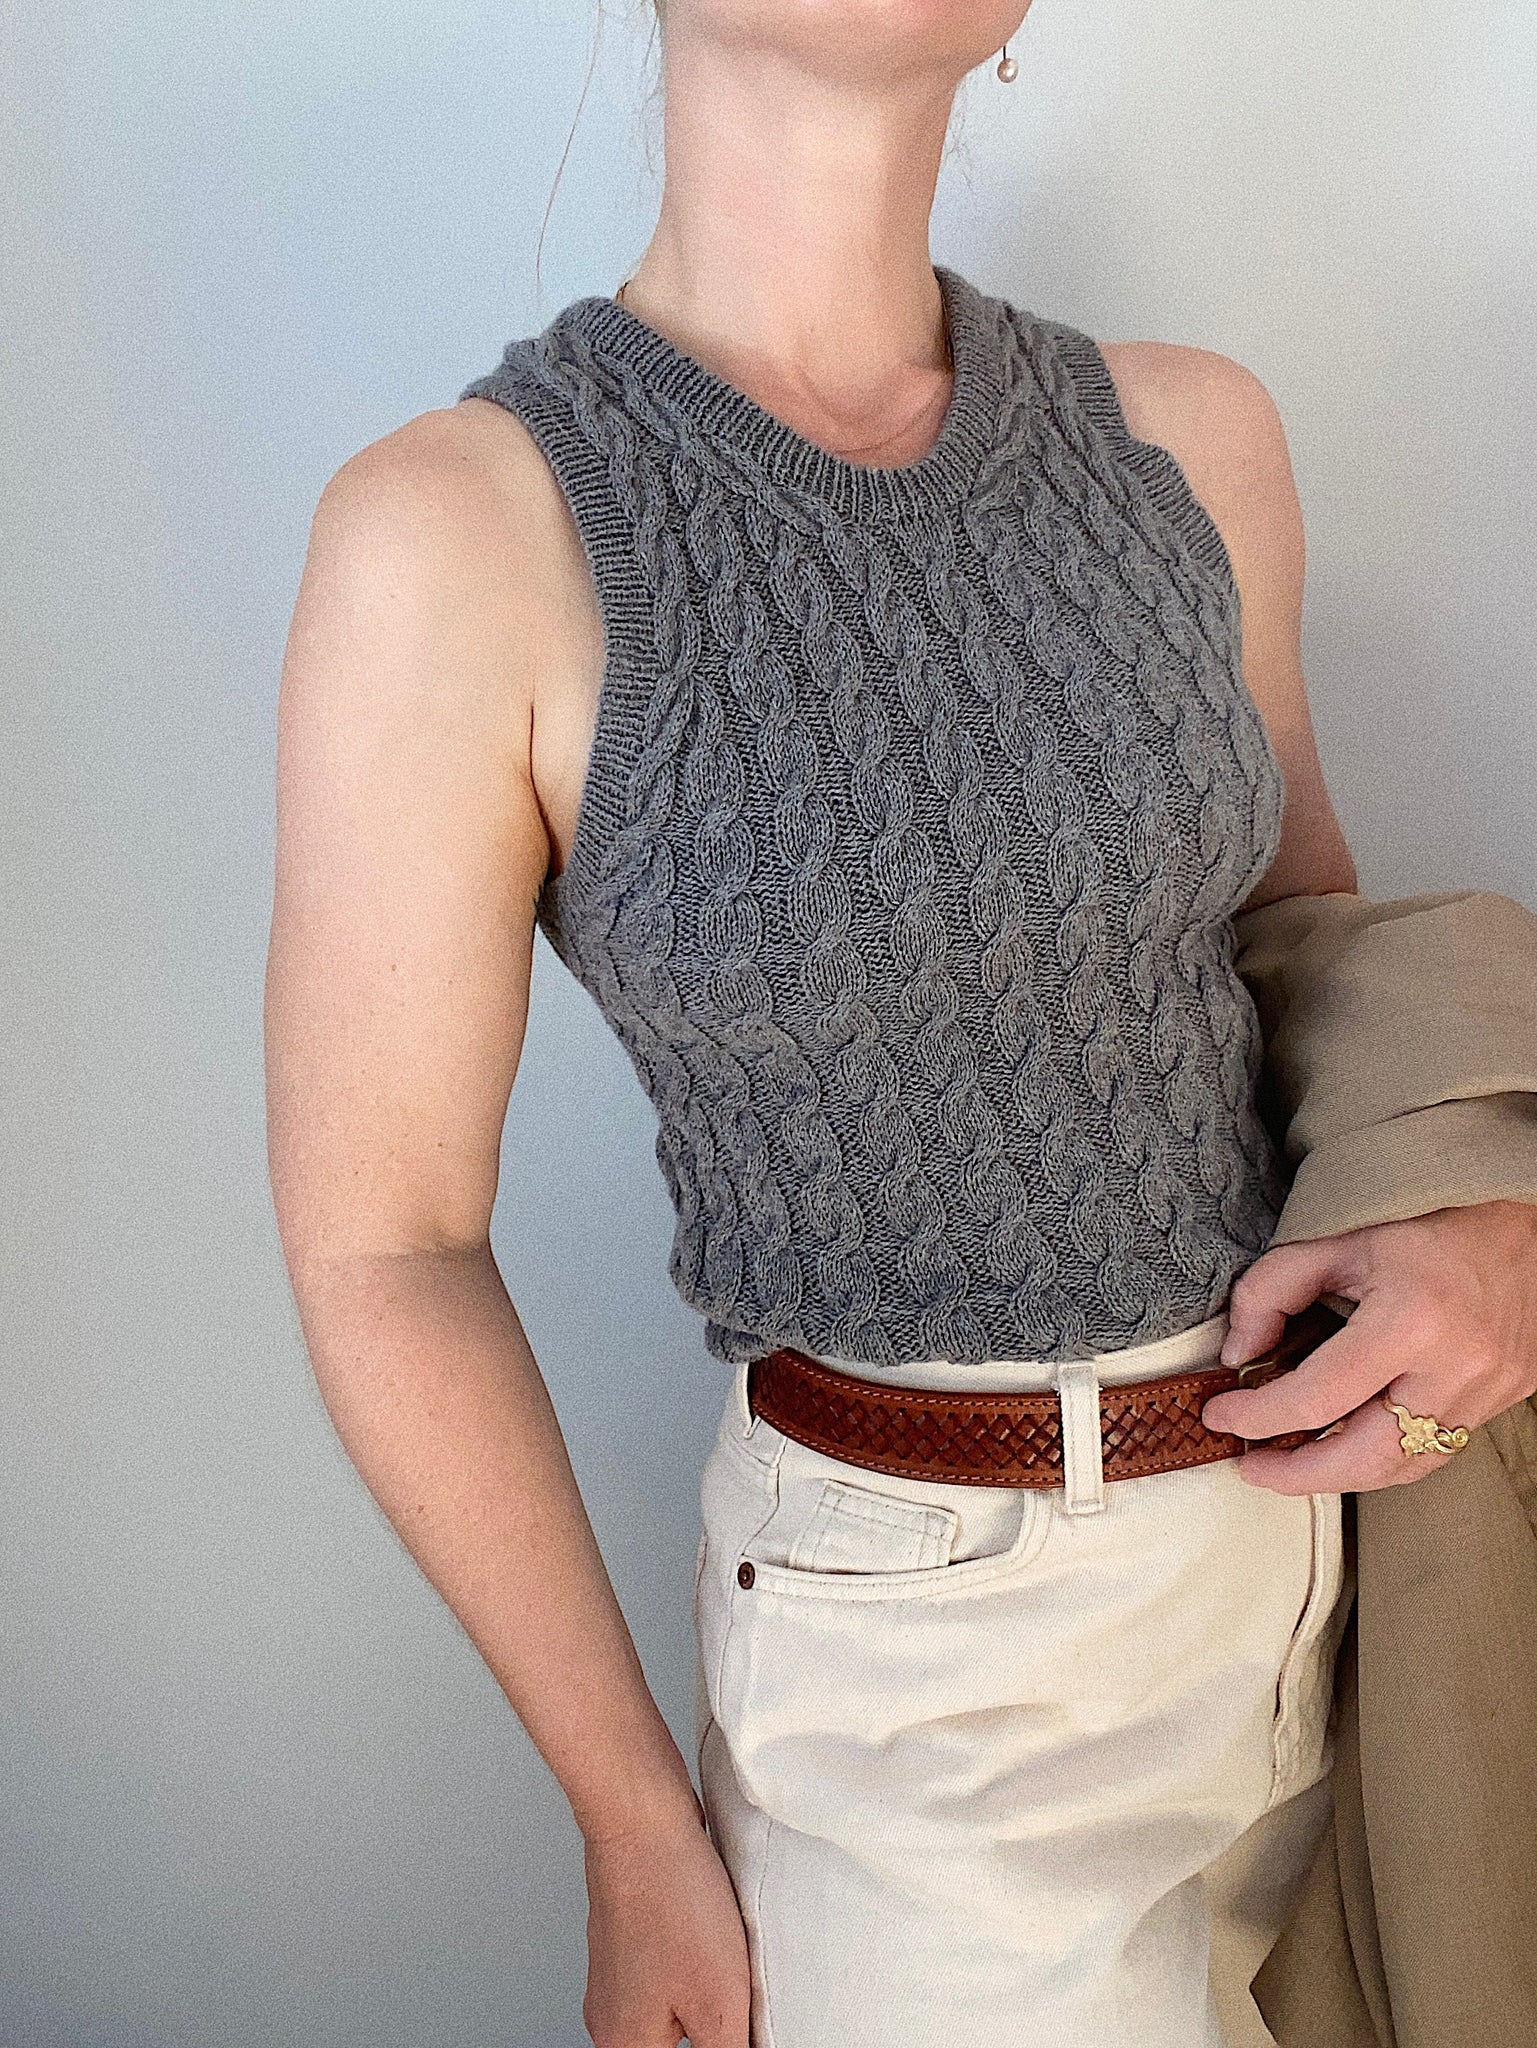 Camisole No. 8 My Favourite Things Knitwear - Strikkekit